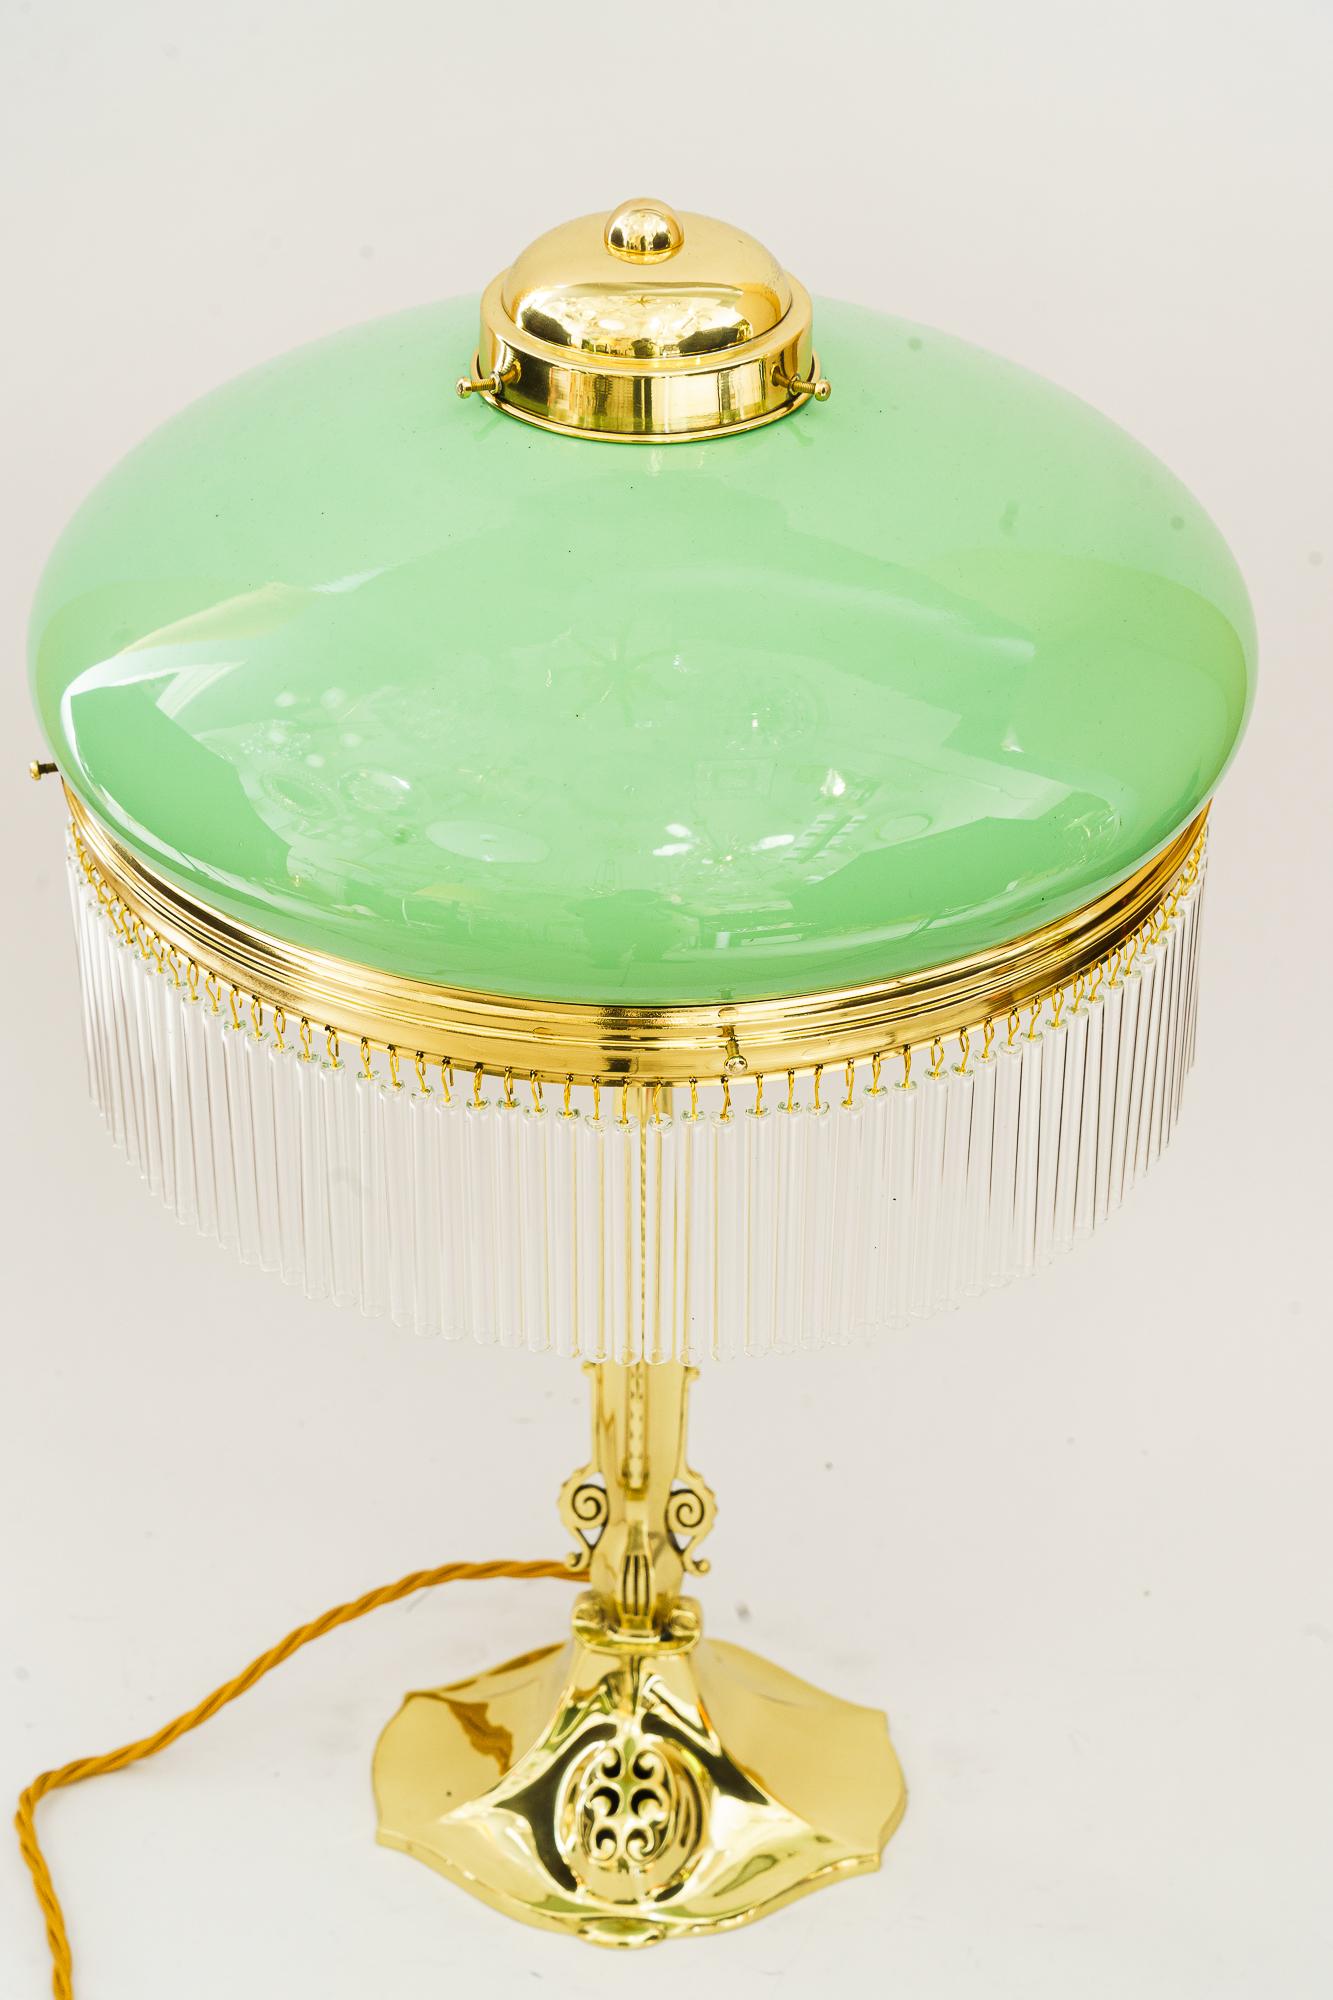 Jugendstil Table lamp with opal glass shade and glass sticks vienna around 1910s
Brass polished and stove enameled
Original opal glass shade
The glass sticks are replaced ( new )